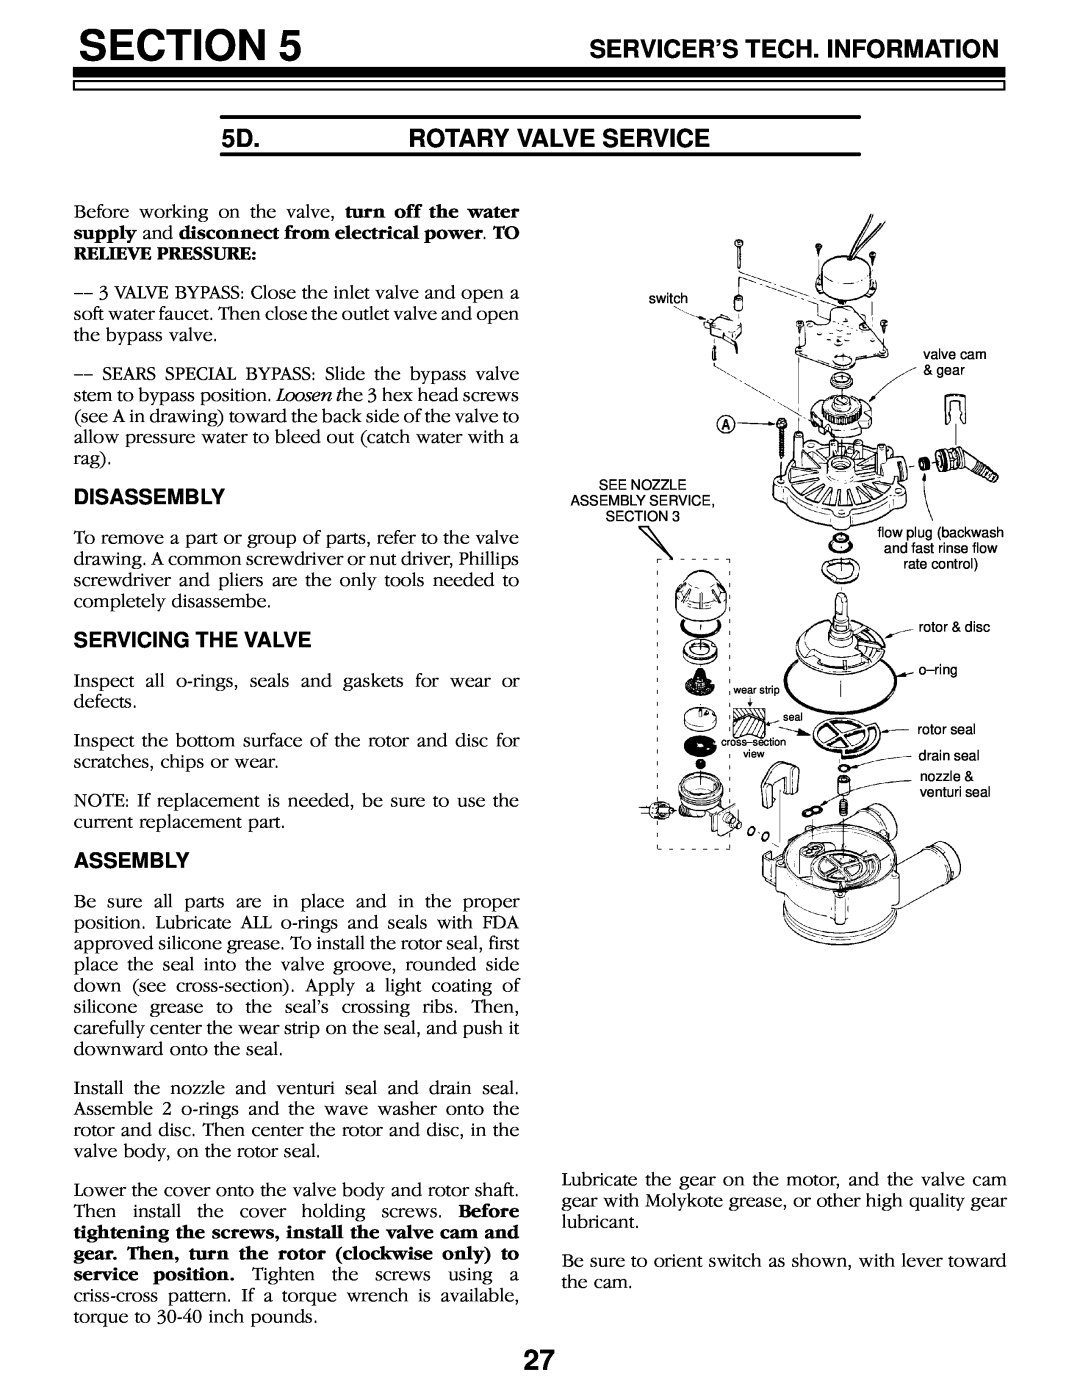 Kenmore 625.3483500 Section, Servicers Tech. Information, 5D.ROTARY VALVE SERVICE, Disassembly, Servicing The Valve 